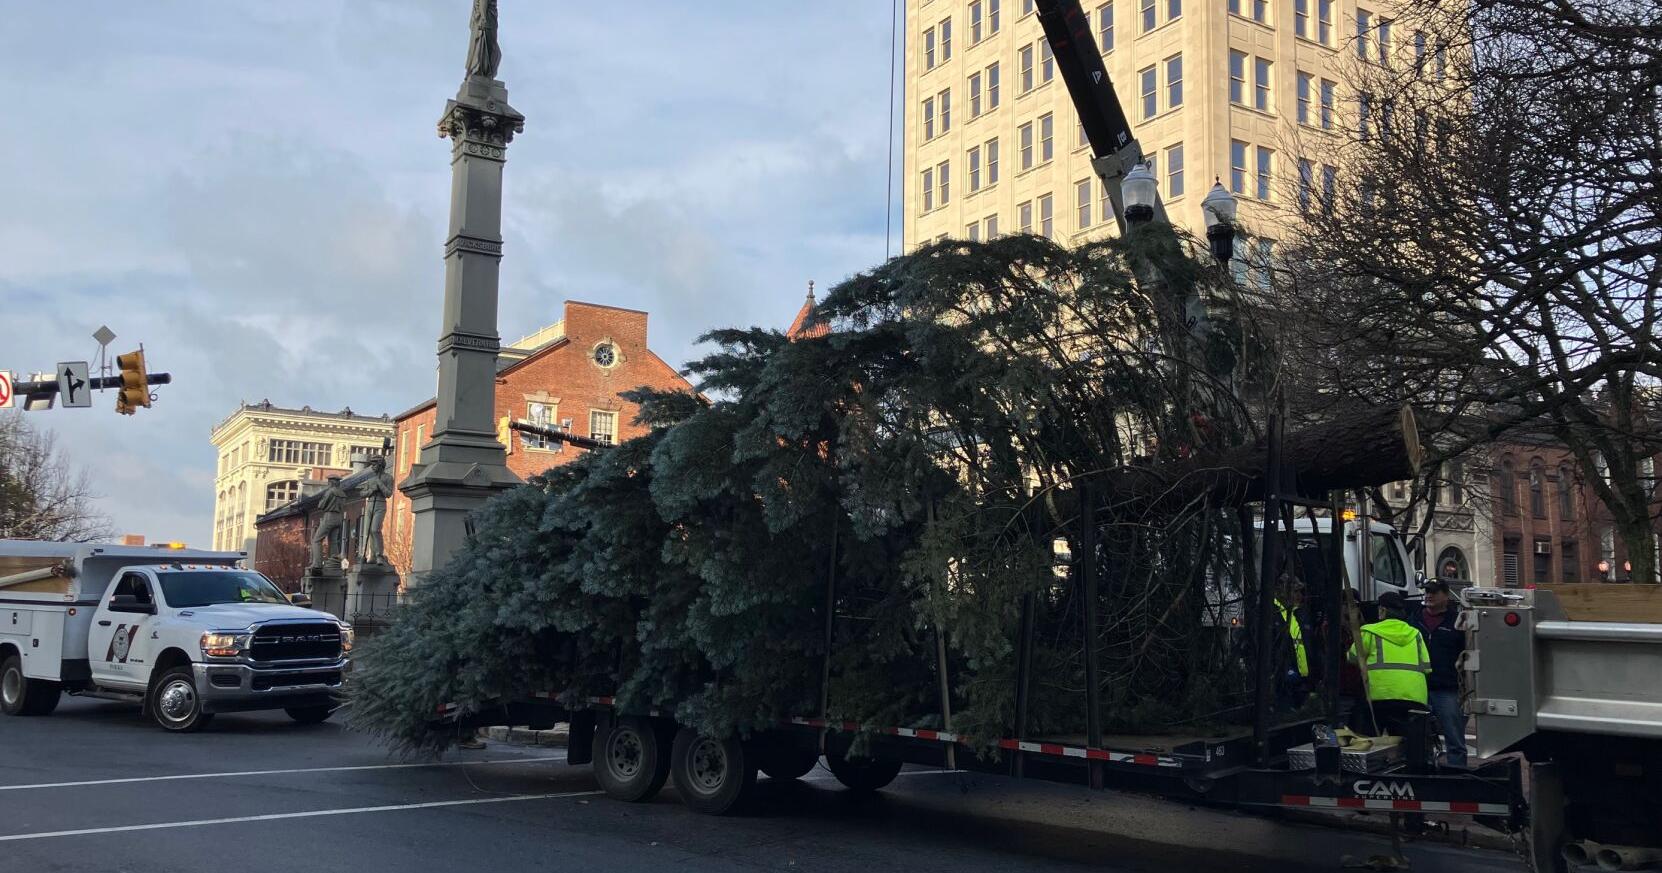 WATCH: This year's Christmas tree arrives in downtown Lancaster city